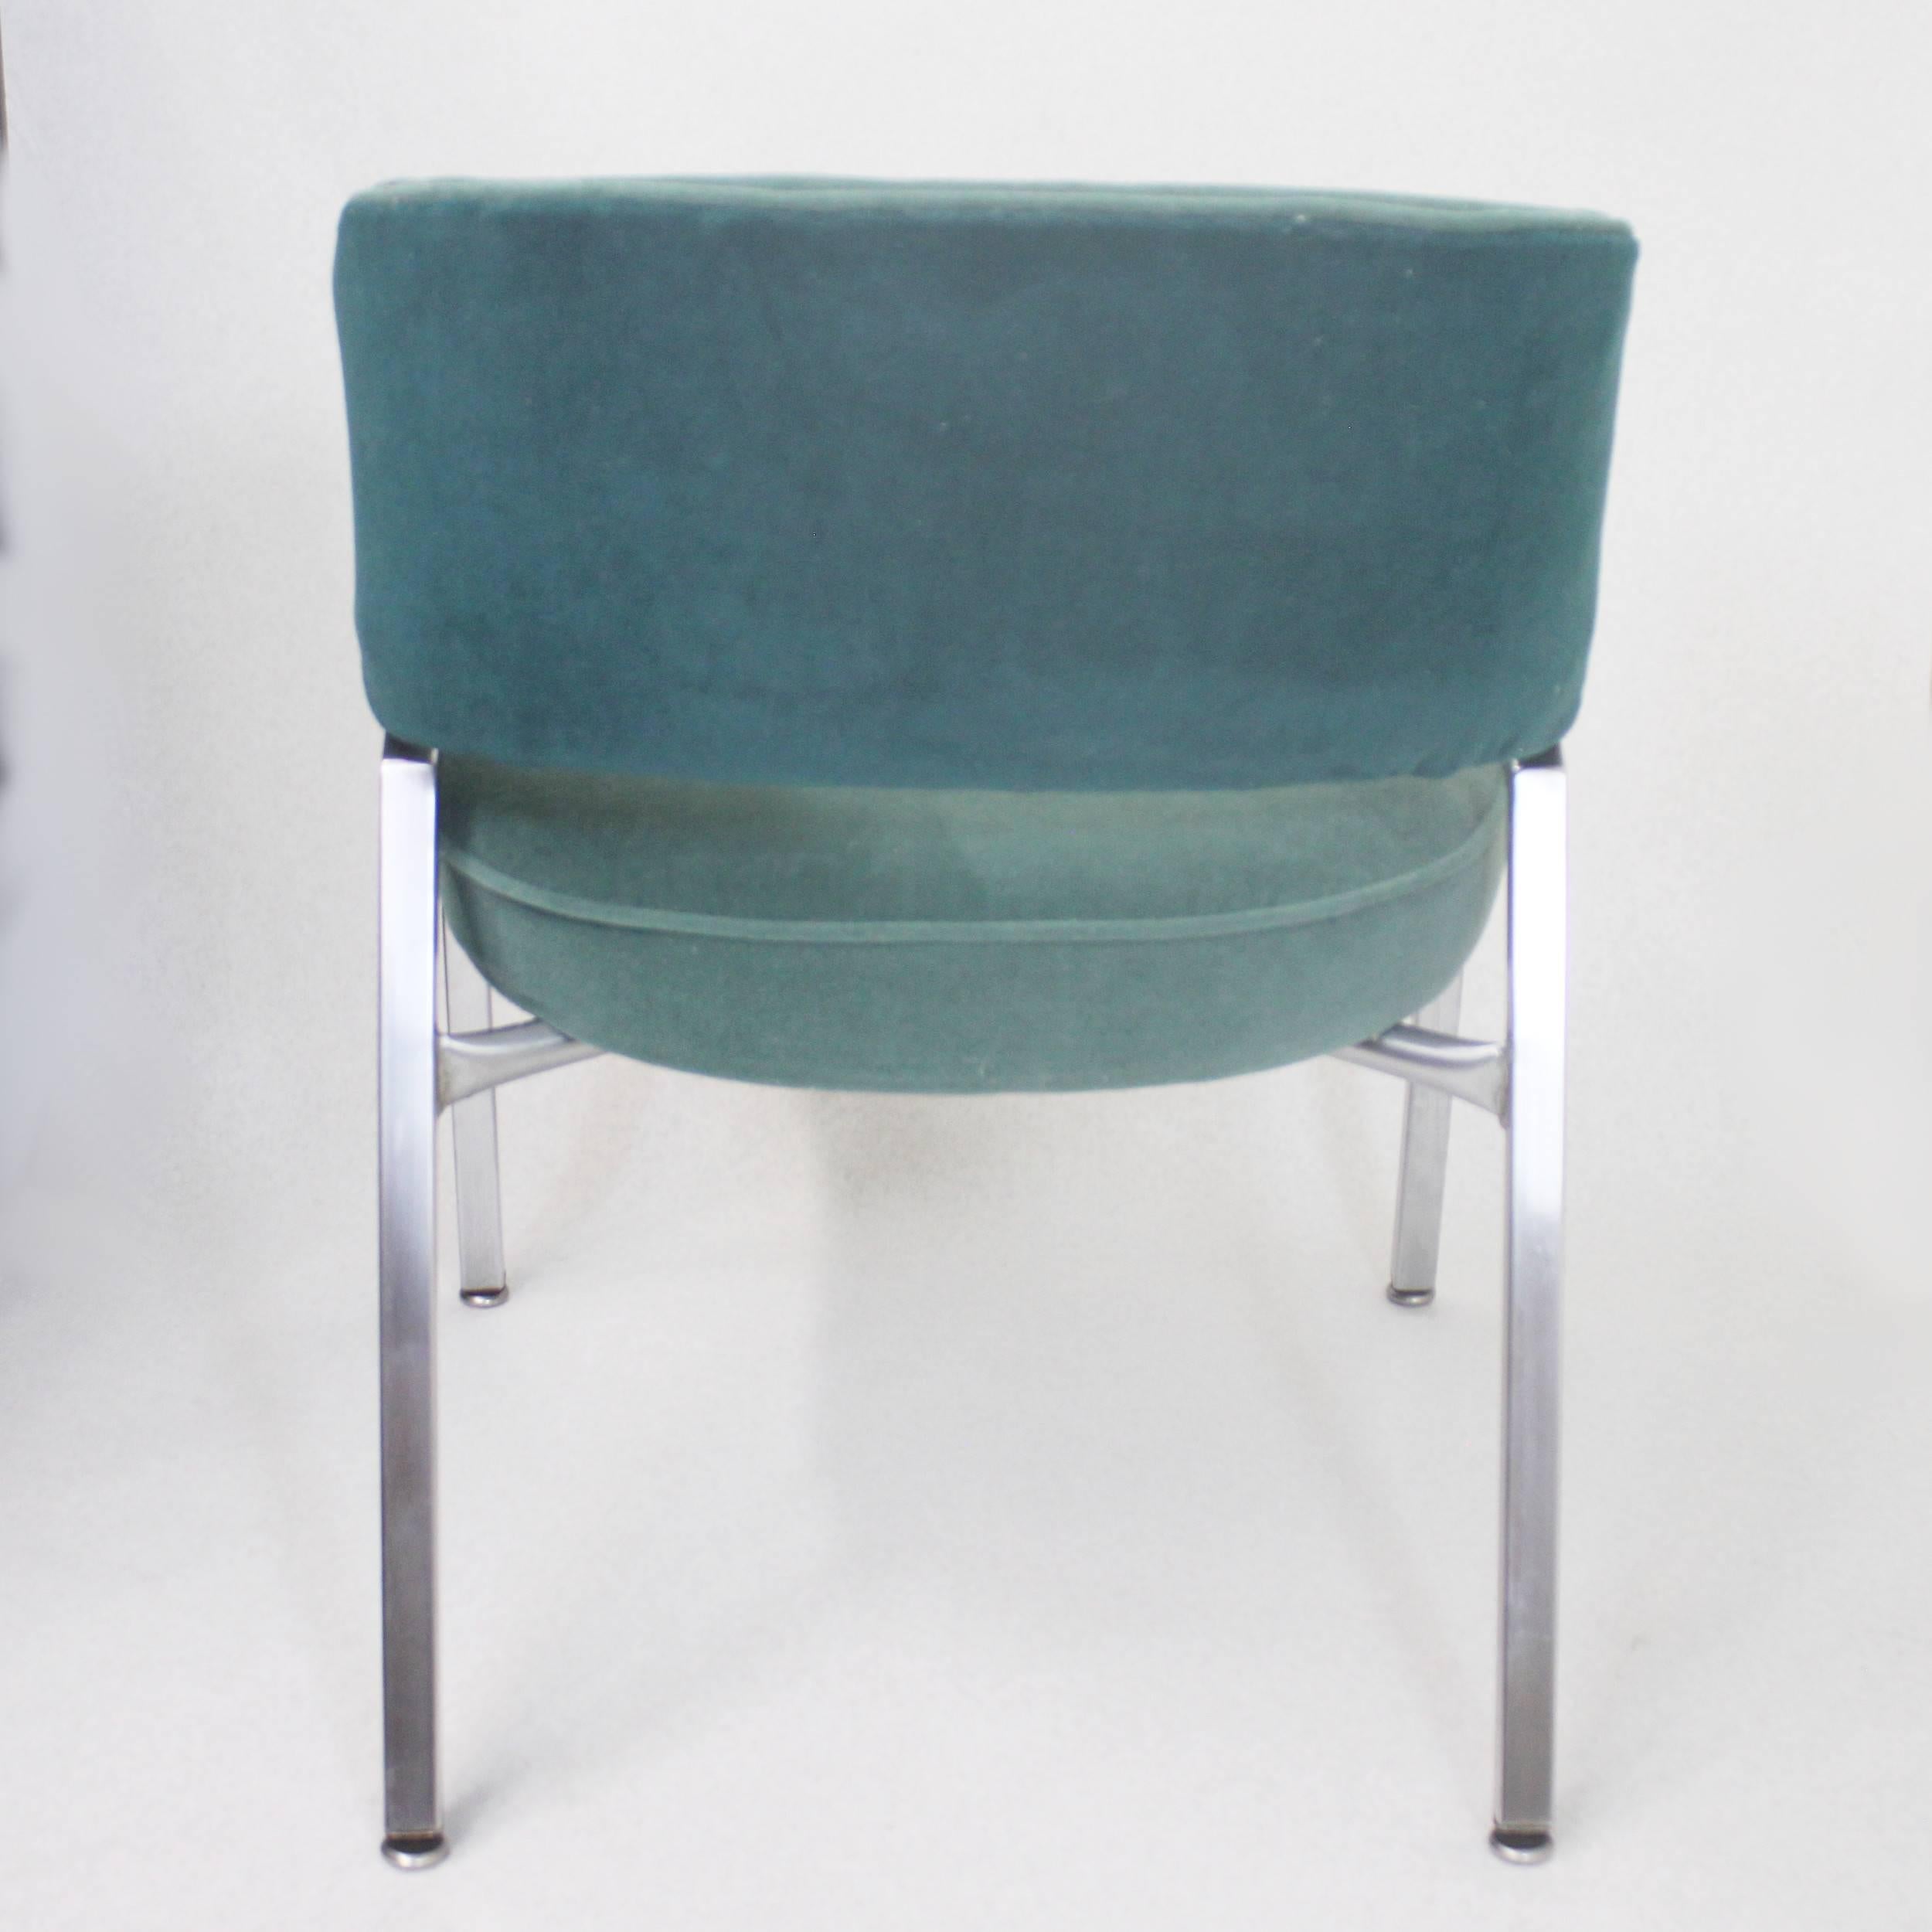 Rare Pair of 1970s Mid-Century Modern Teal Green and Chrome Side Arm Chairs 5